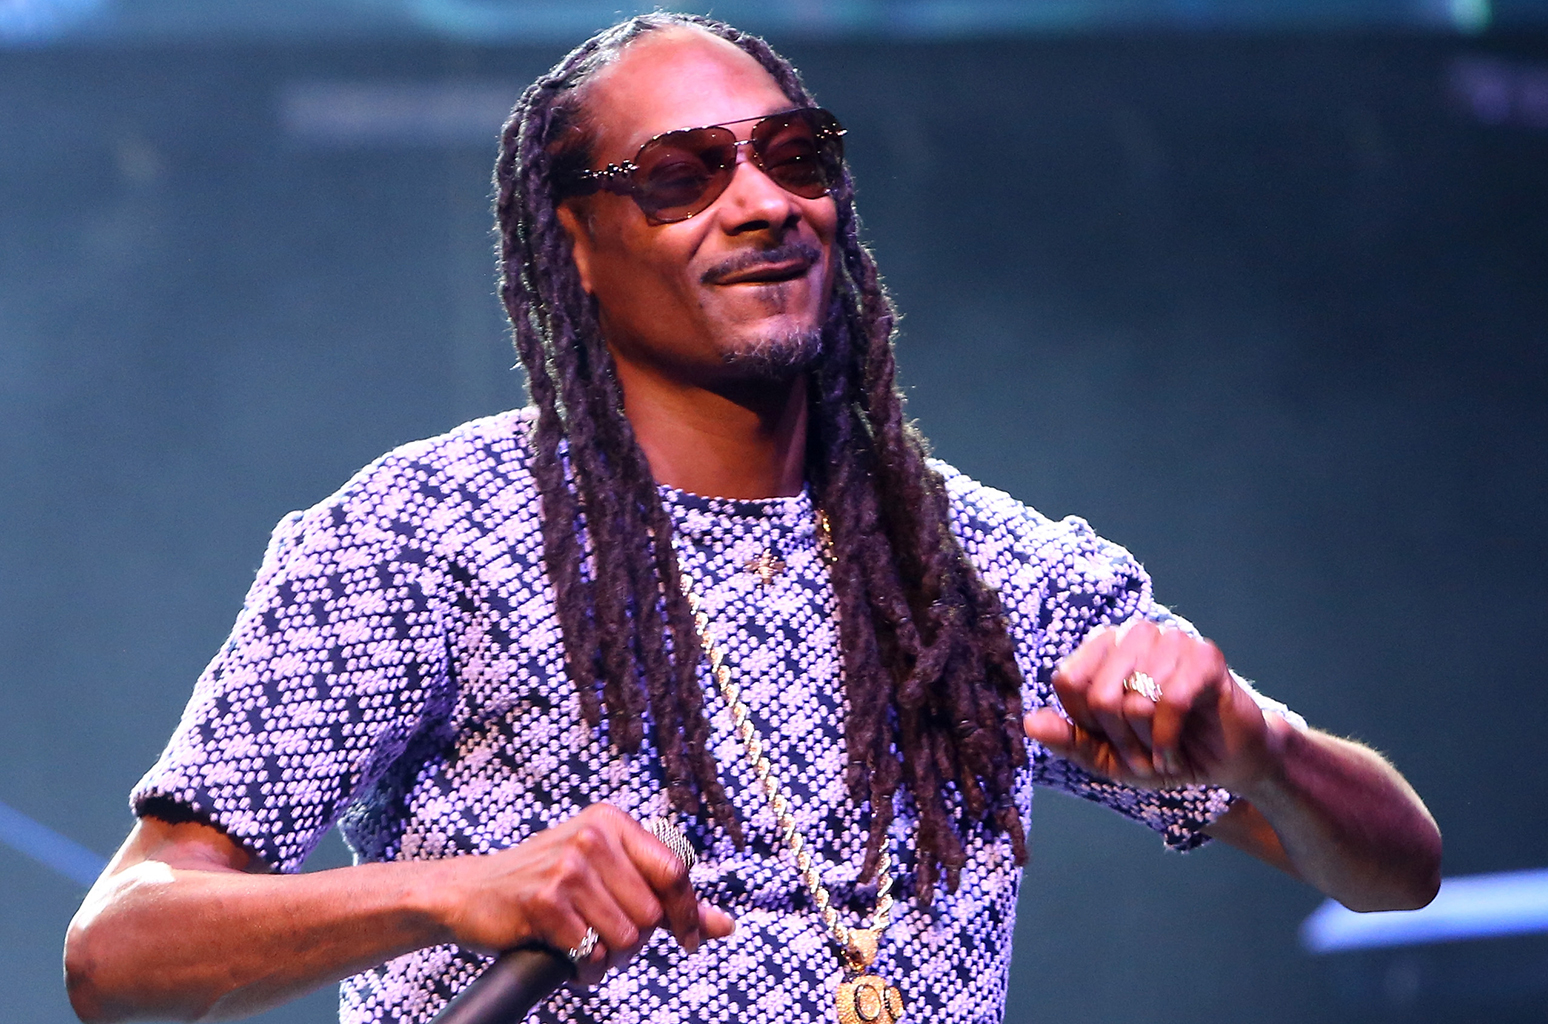 Snoop Dogg Buys Ownership Stake In Ice Cube's BIG3 Basketball League